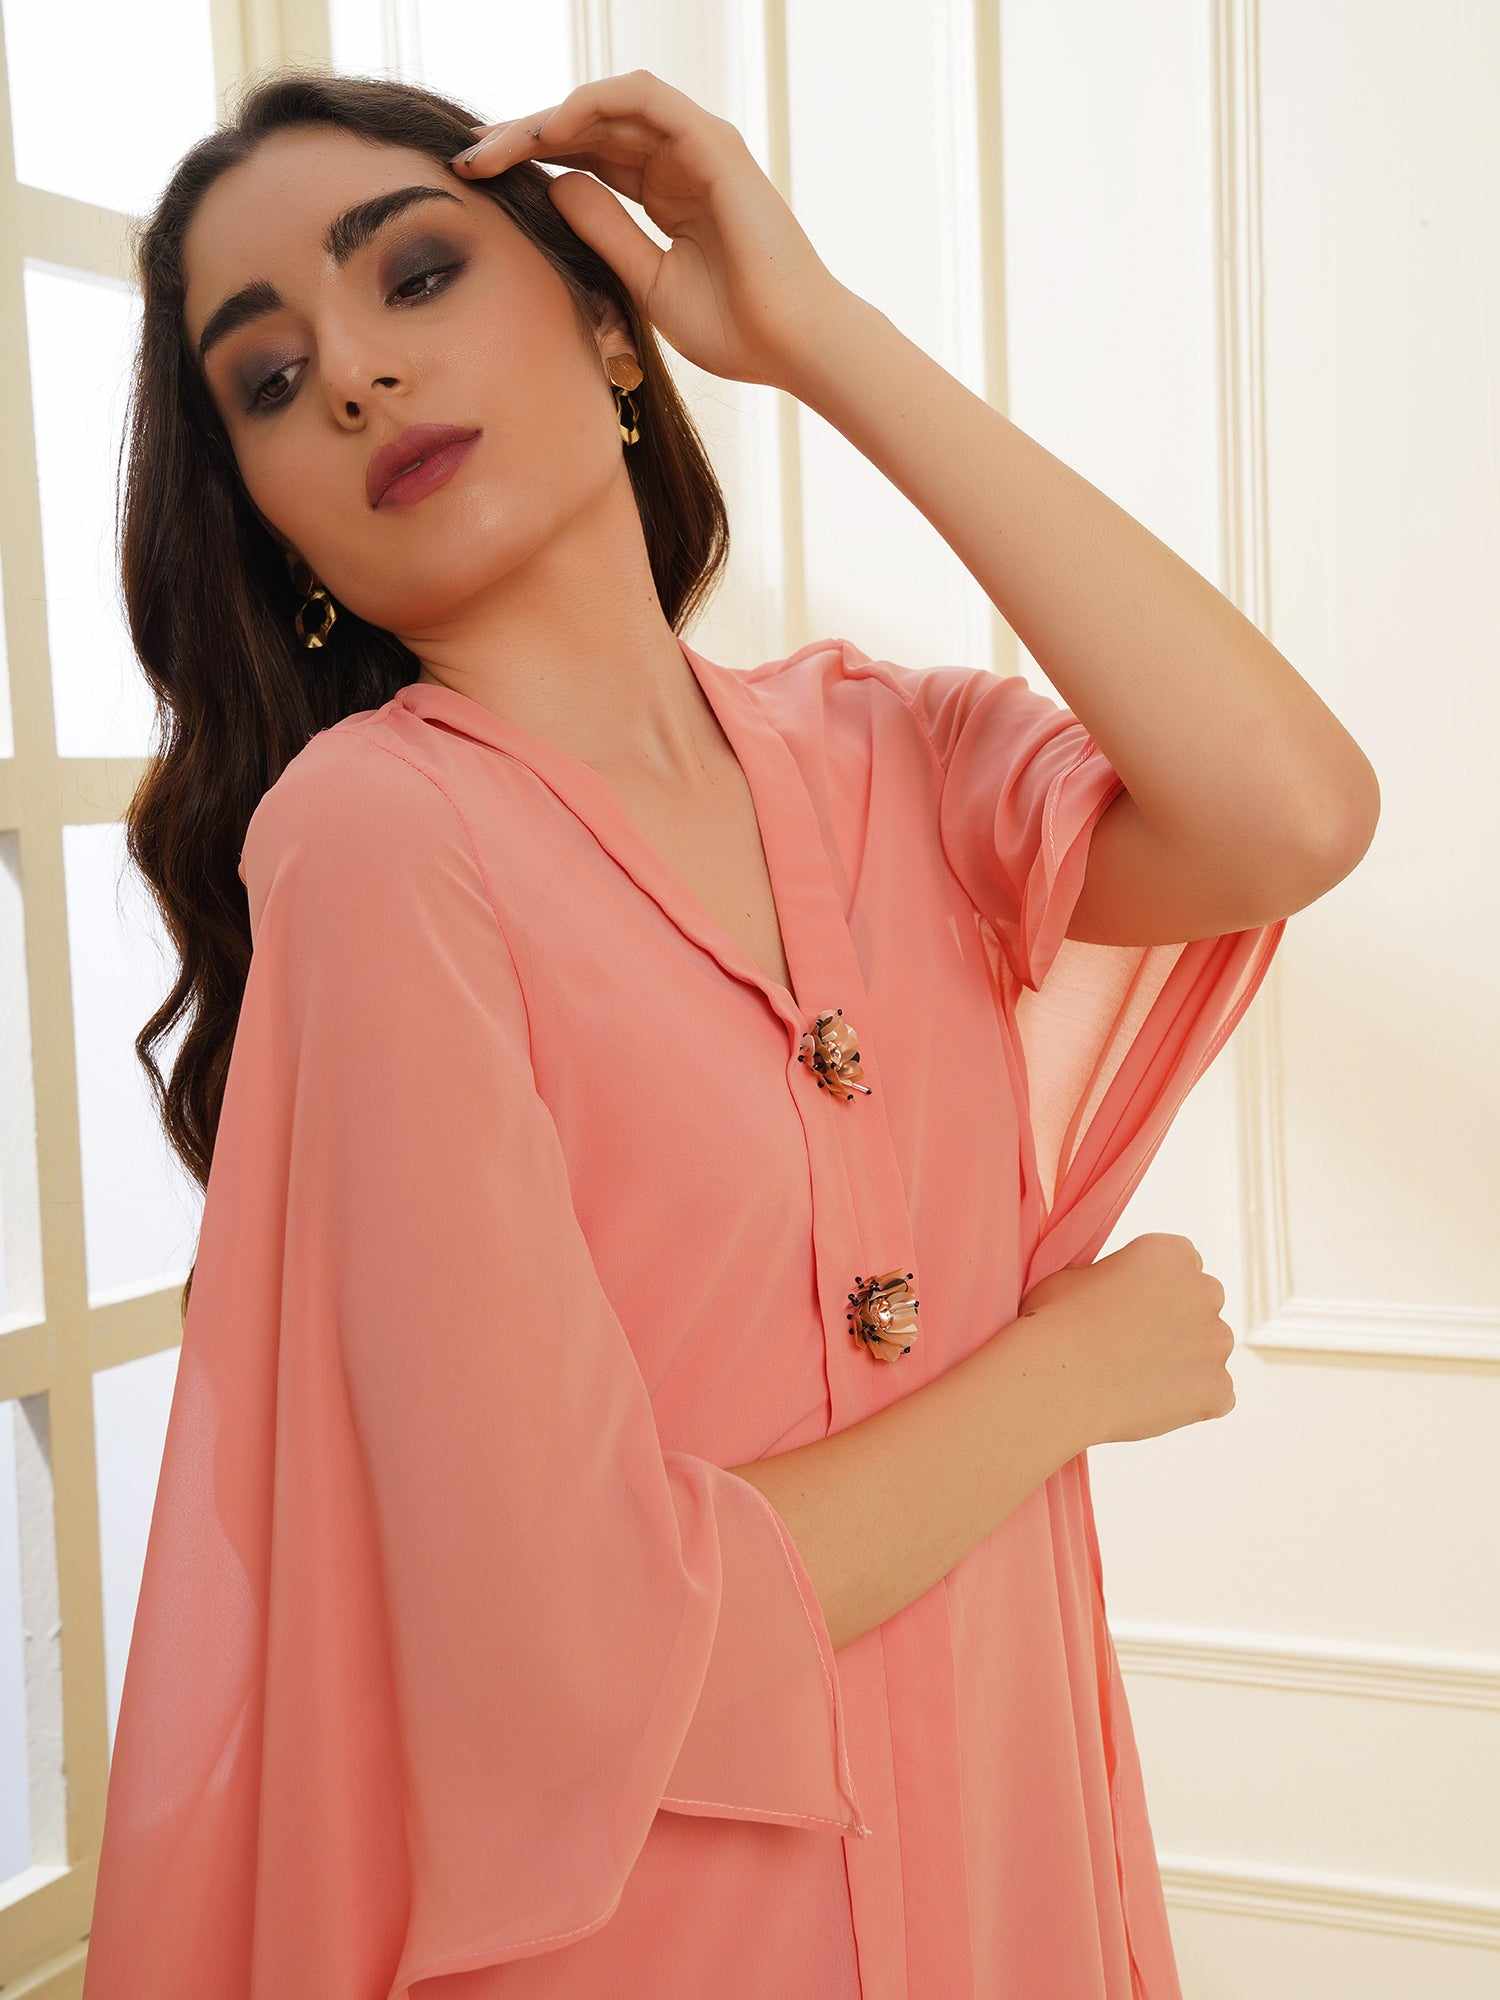 peach dress with placket embellishment